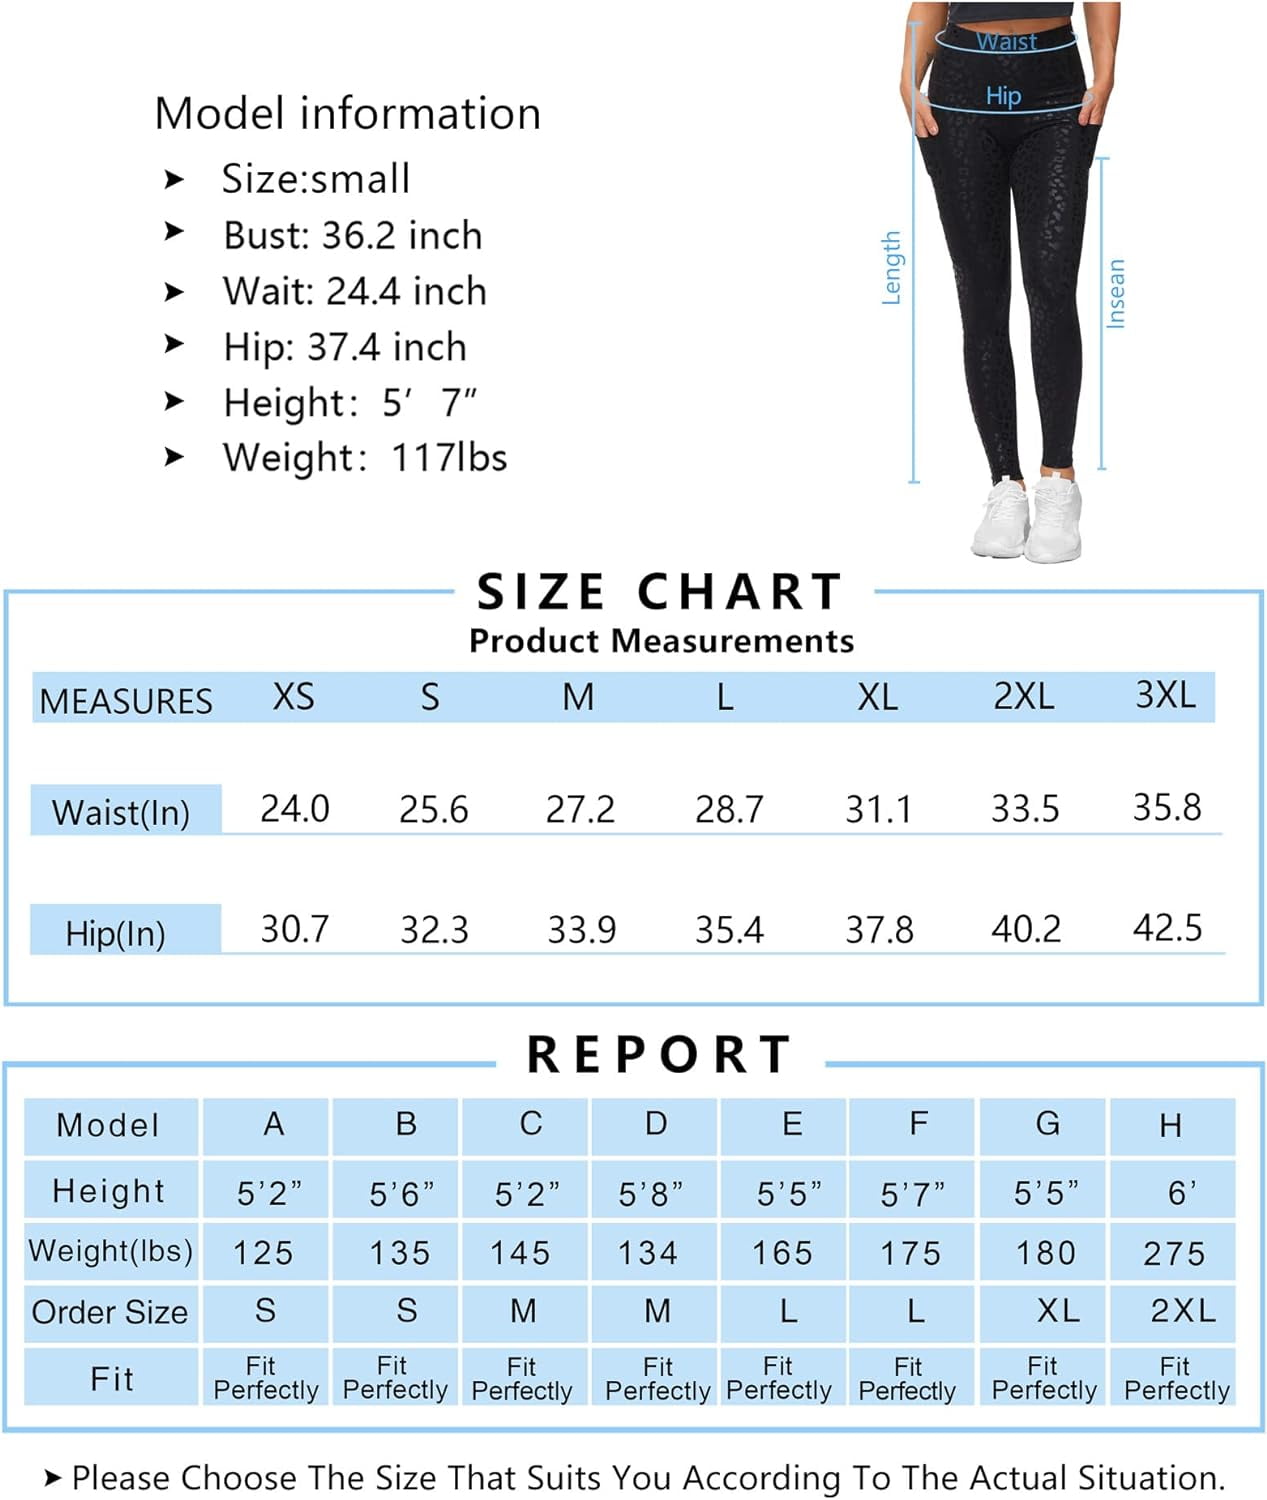 THE GYM PEOPLE Tummy Control Workout Leggings with Pockets High Waist  Athletic Yoga Pants for Women Running, Fitness (Bright Pin